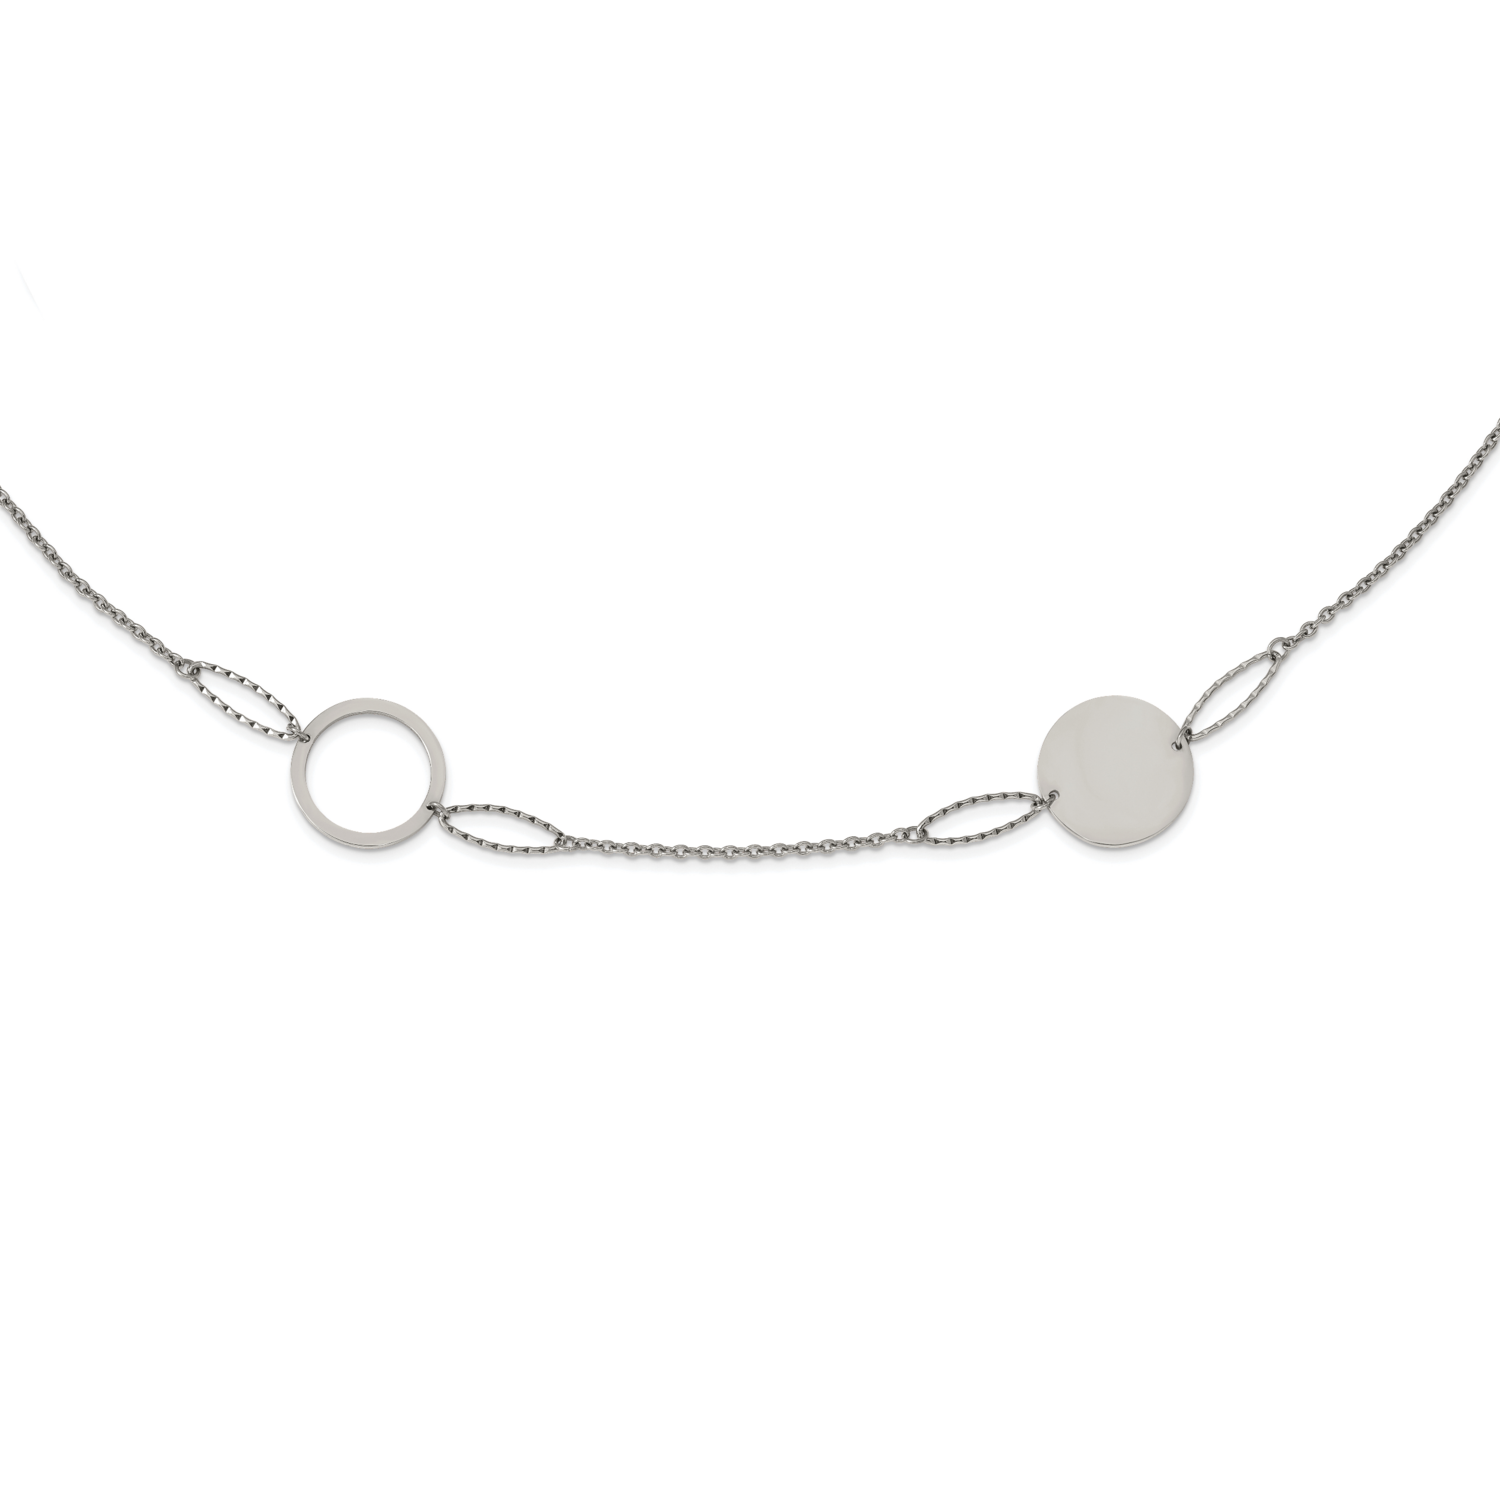 36 Inch Fancy Circle Link Necklace Stainless Steel Polished SRN2666-36